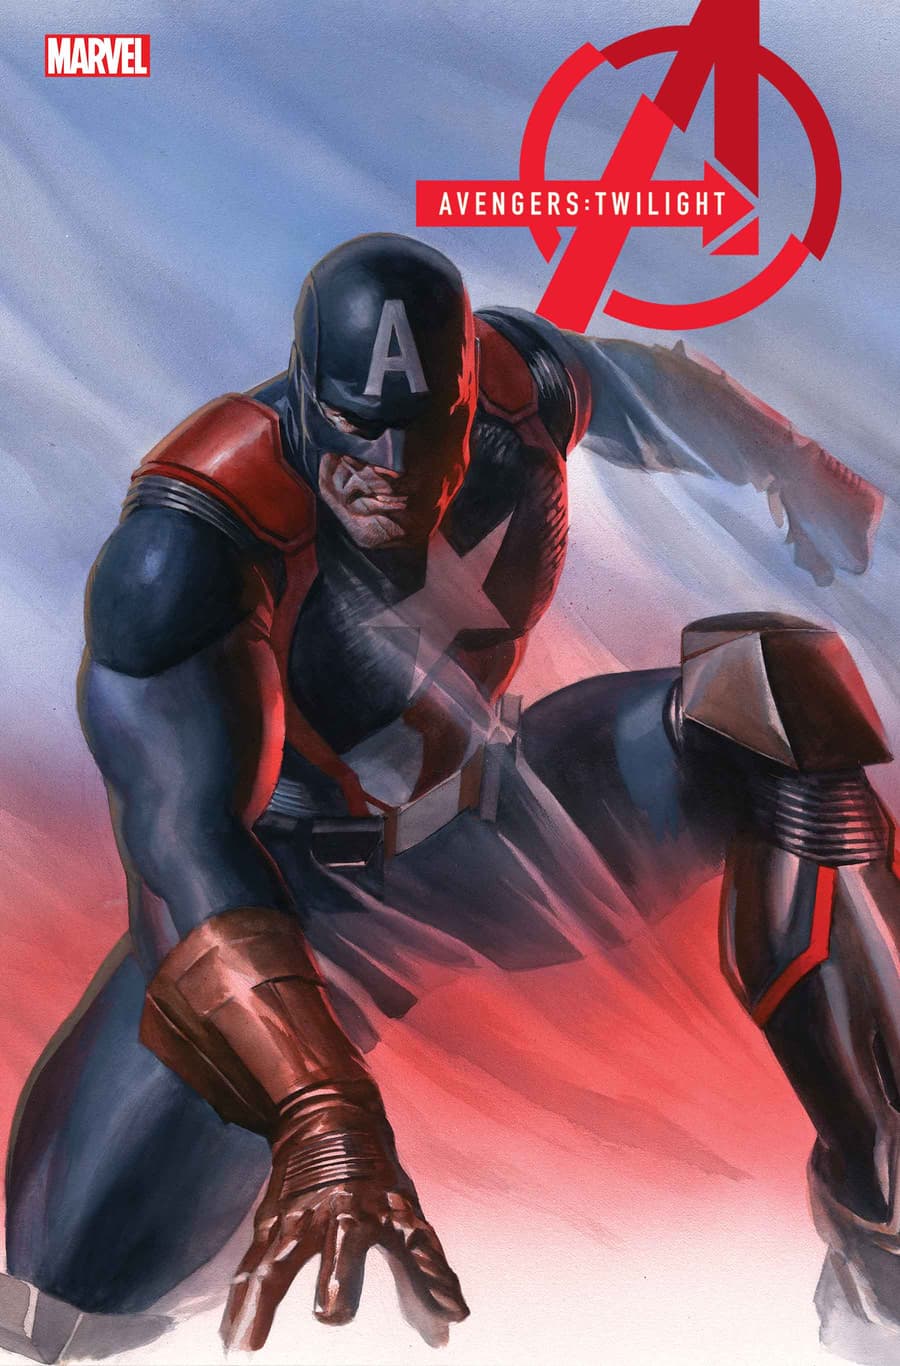 AVENGERS: TWILIGHT #1 cover by Alex Ross